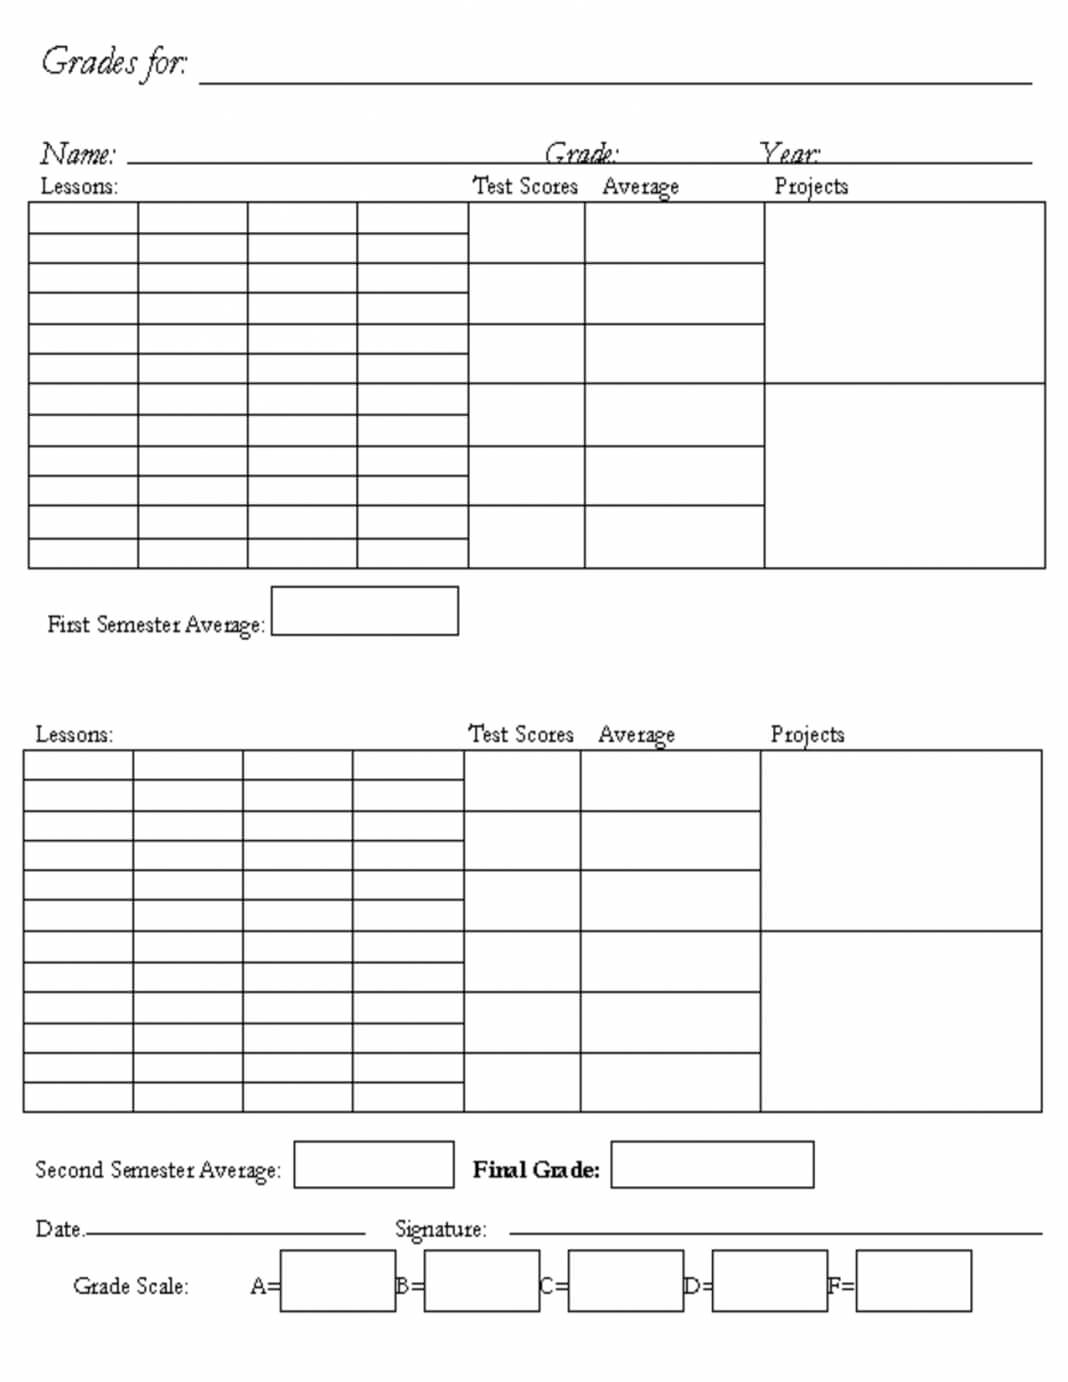 Homeschool Report Card Emplate Examples Best Photos Of Inside Middle School Report Card Template